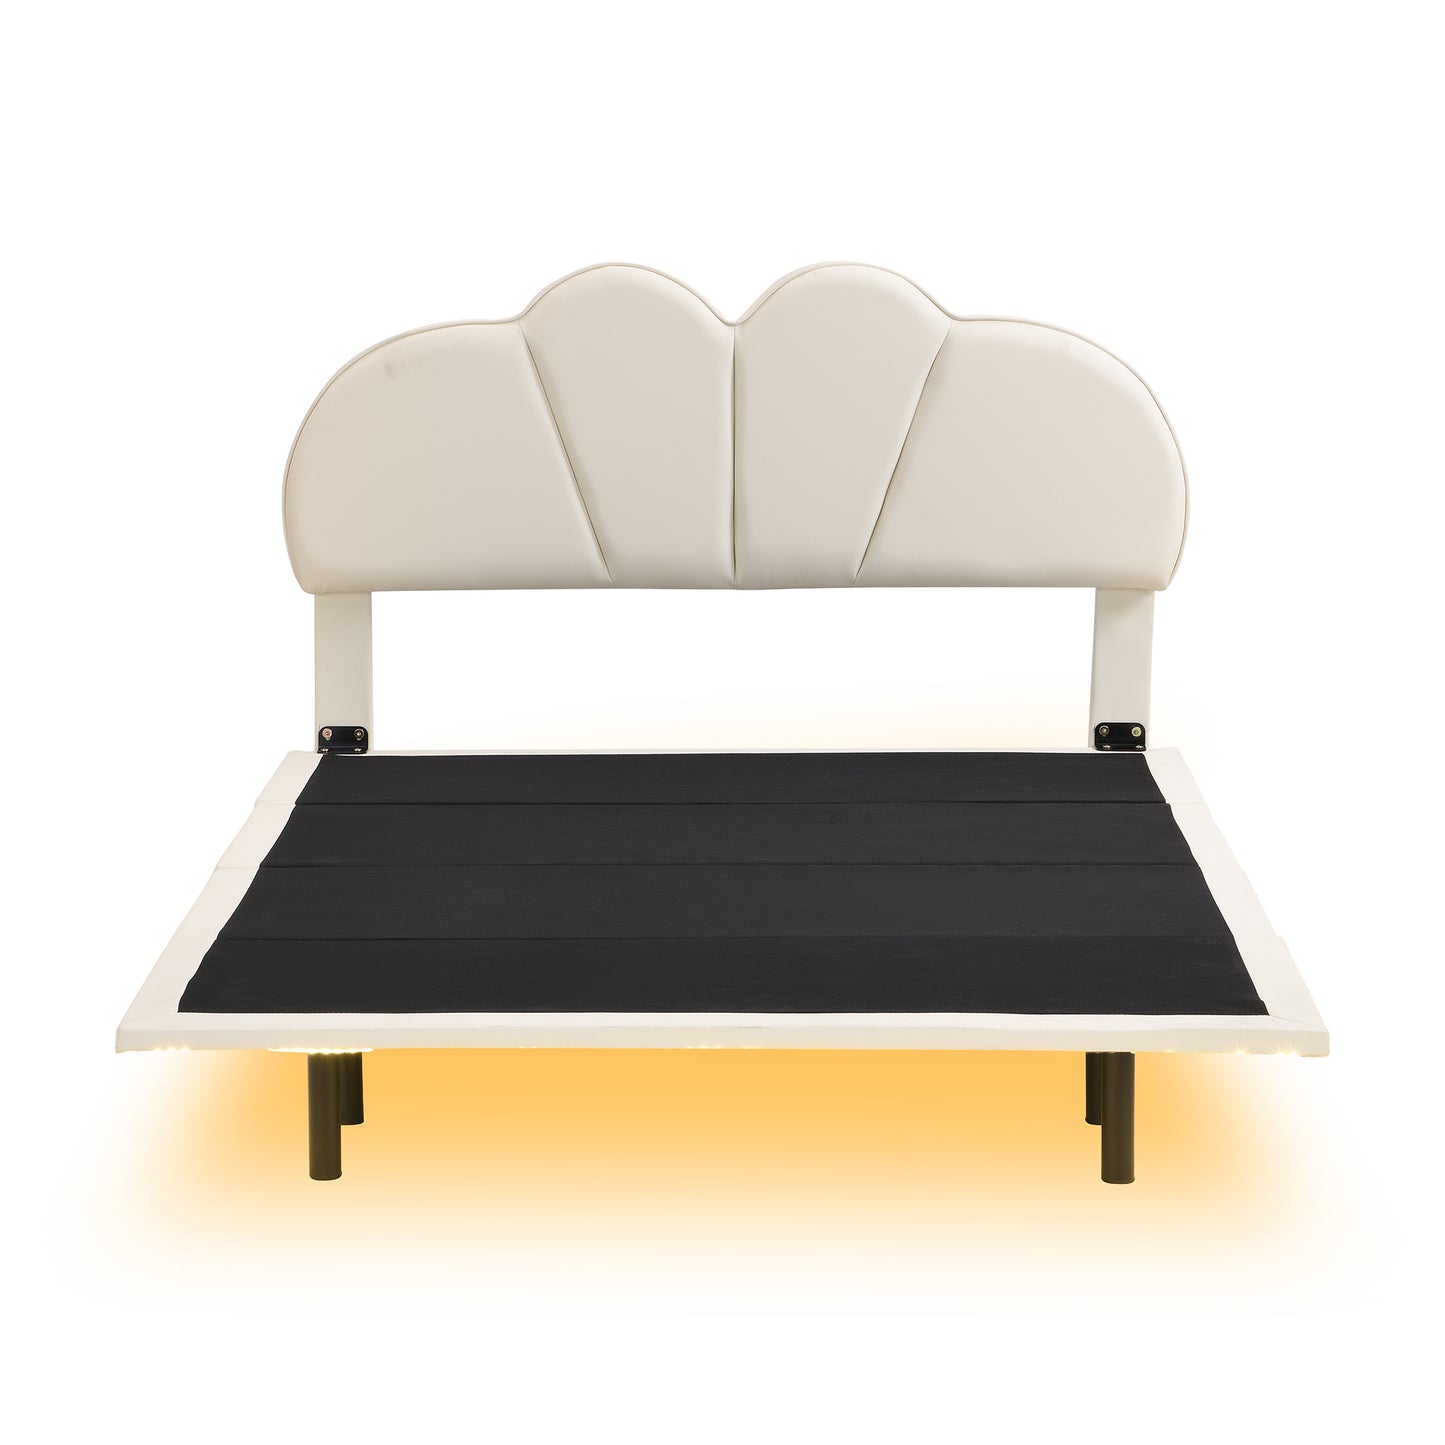 upholstery led floating bed with pu leather headboard